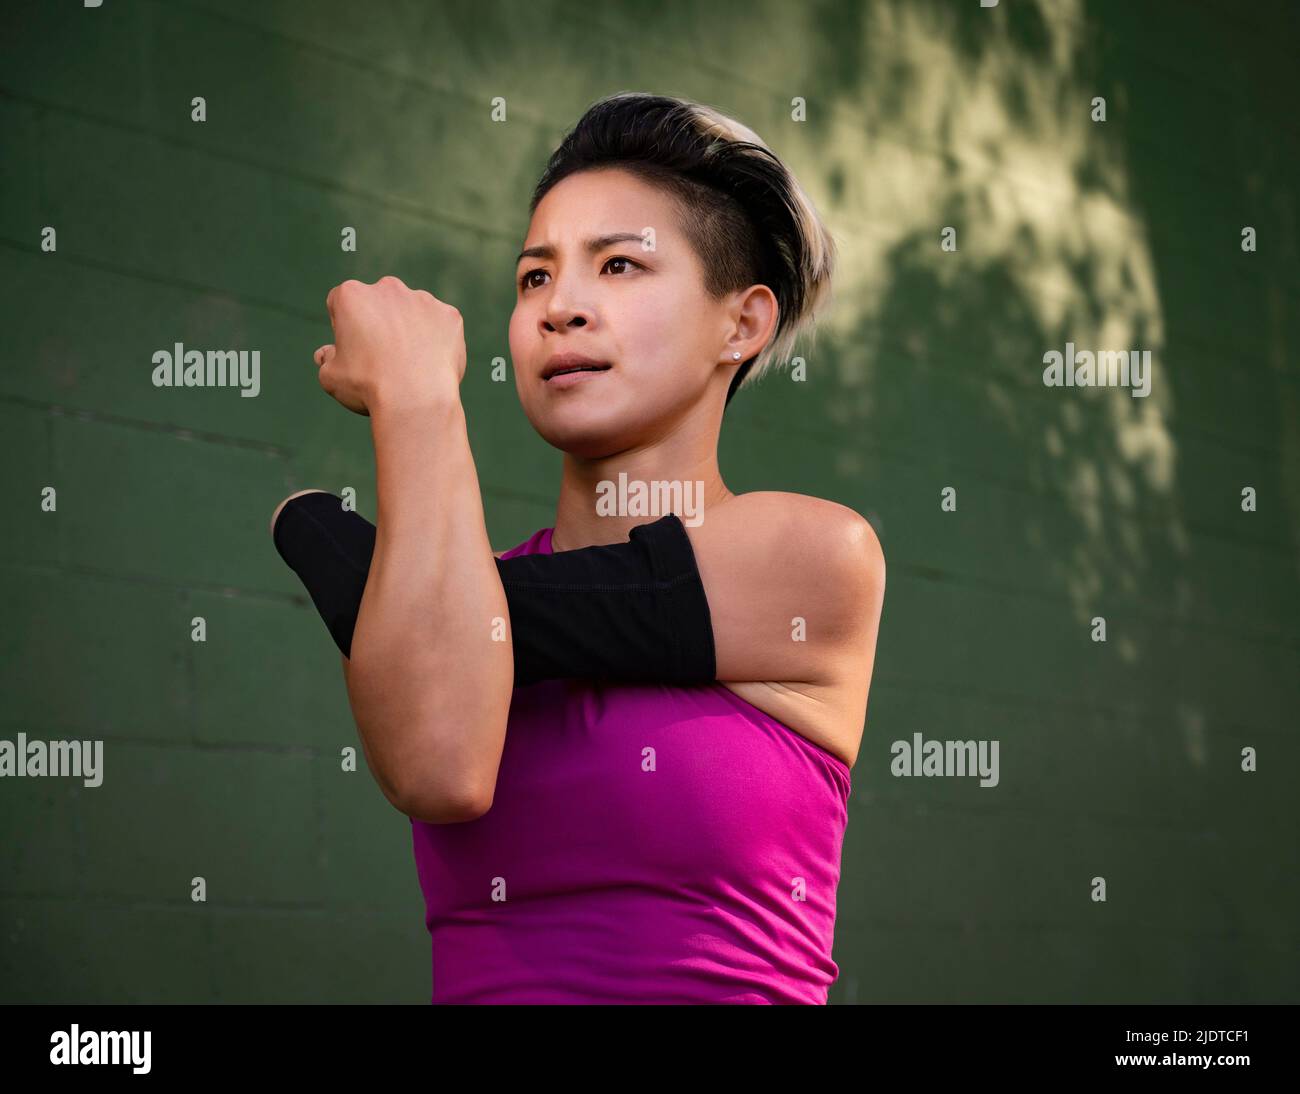 Athletic woman with amputated hand stretching arm Stock Photo